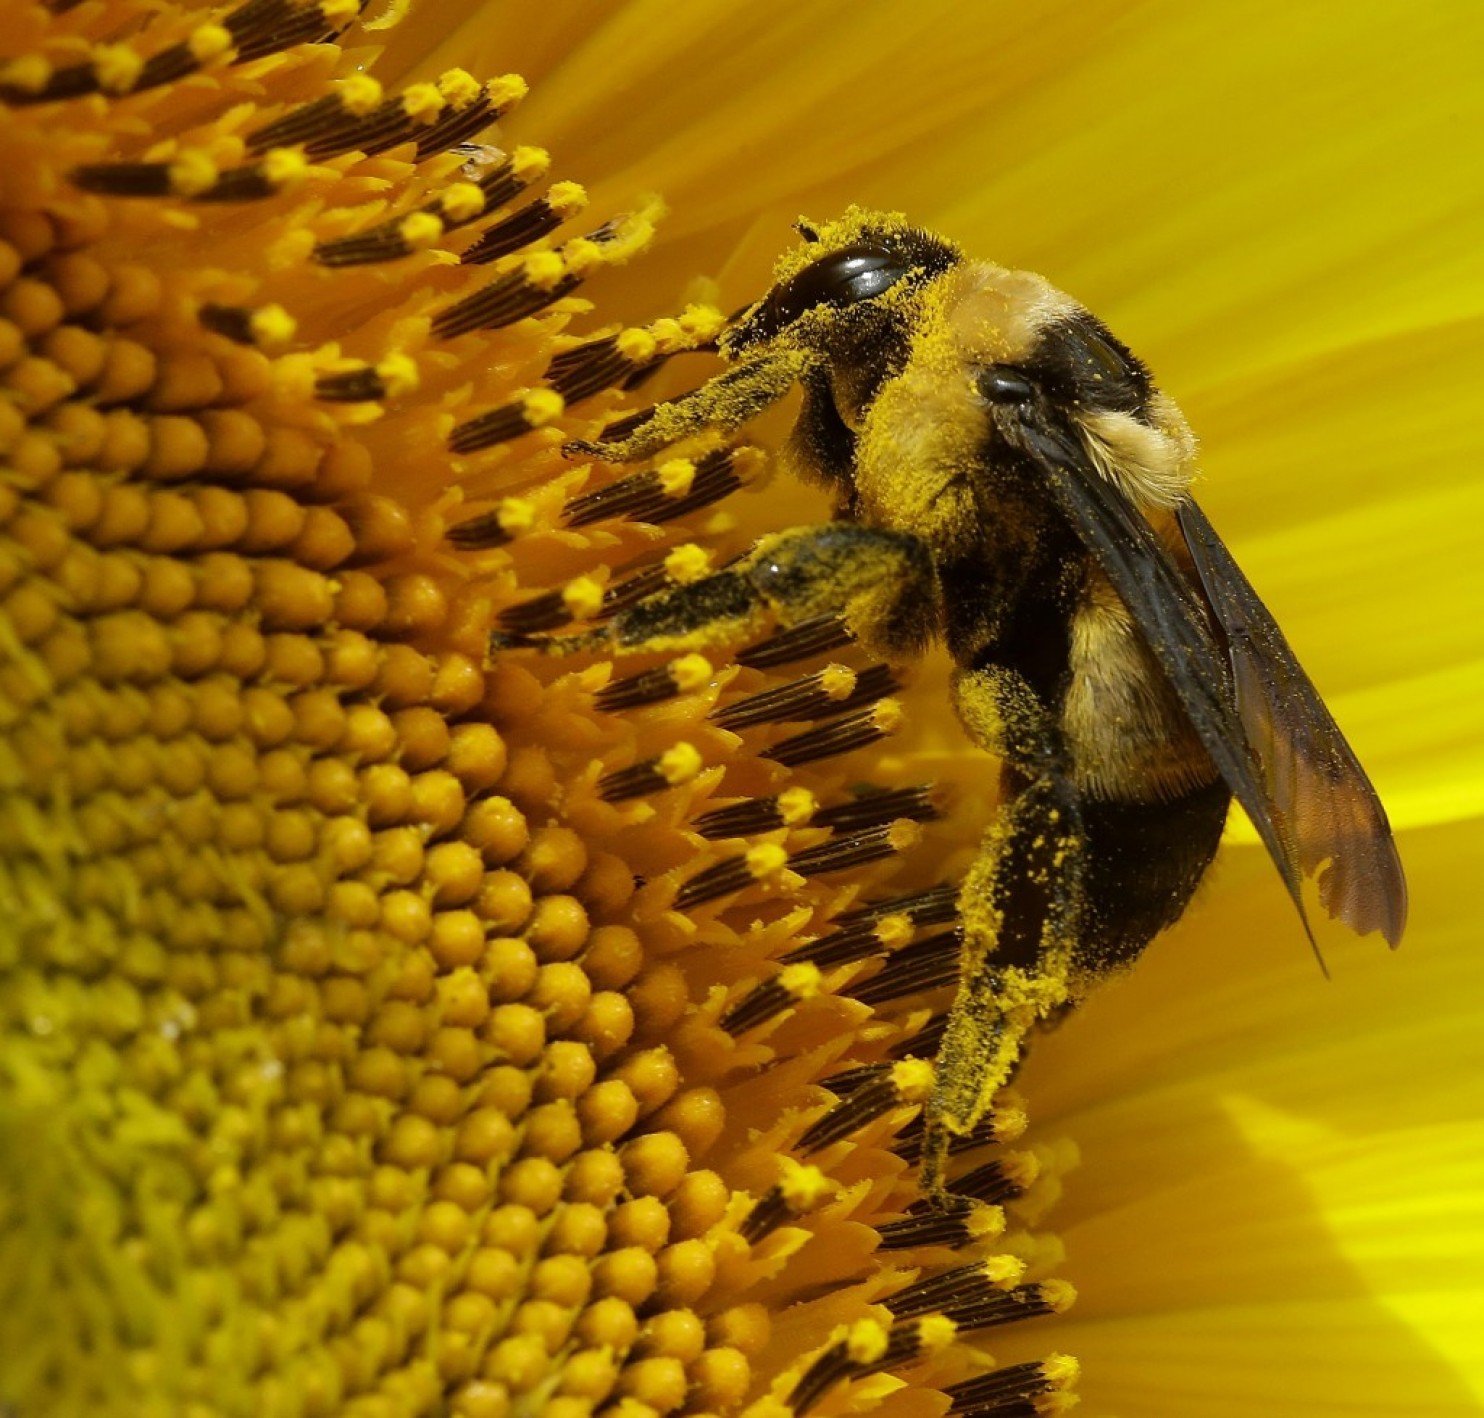 The Ontario Beekeepers' Association is urging the federal government to ban neonicotinoid pesticides. File photo by the Associated Press